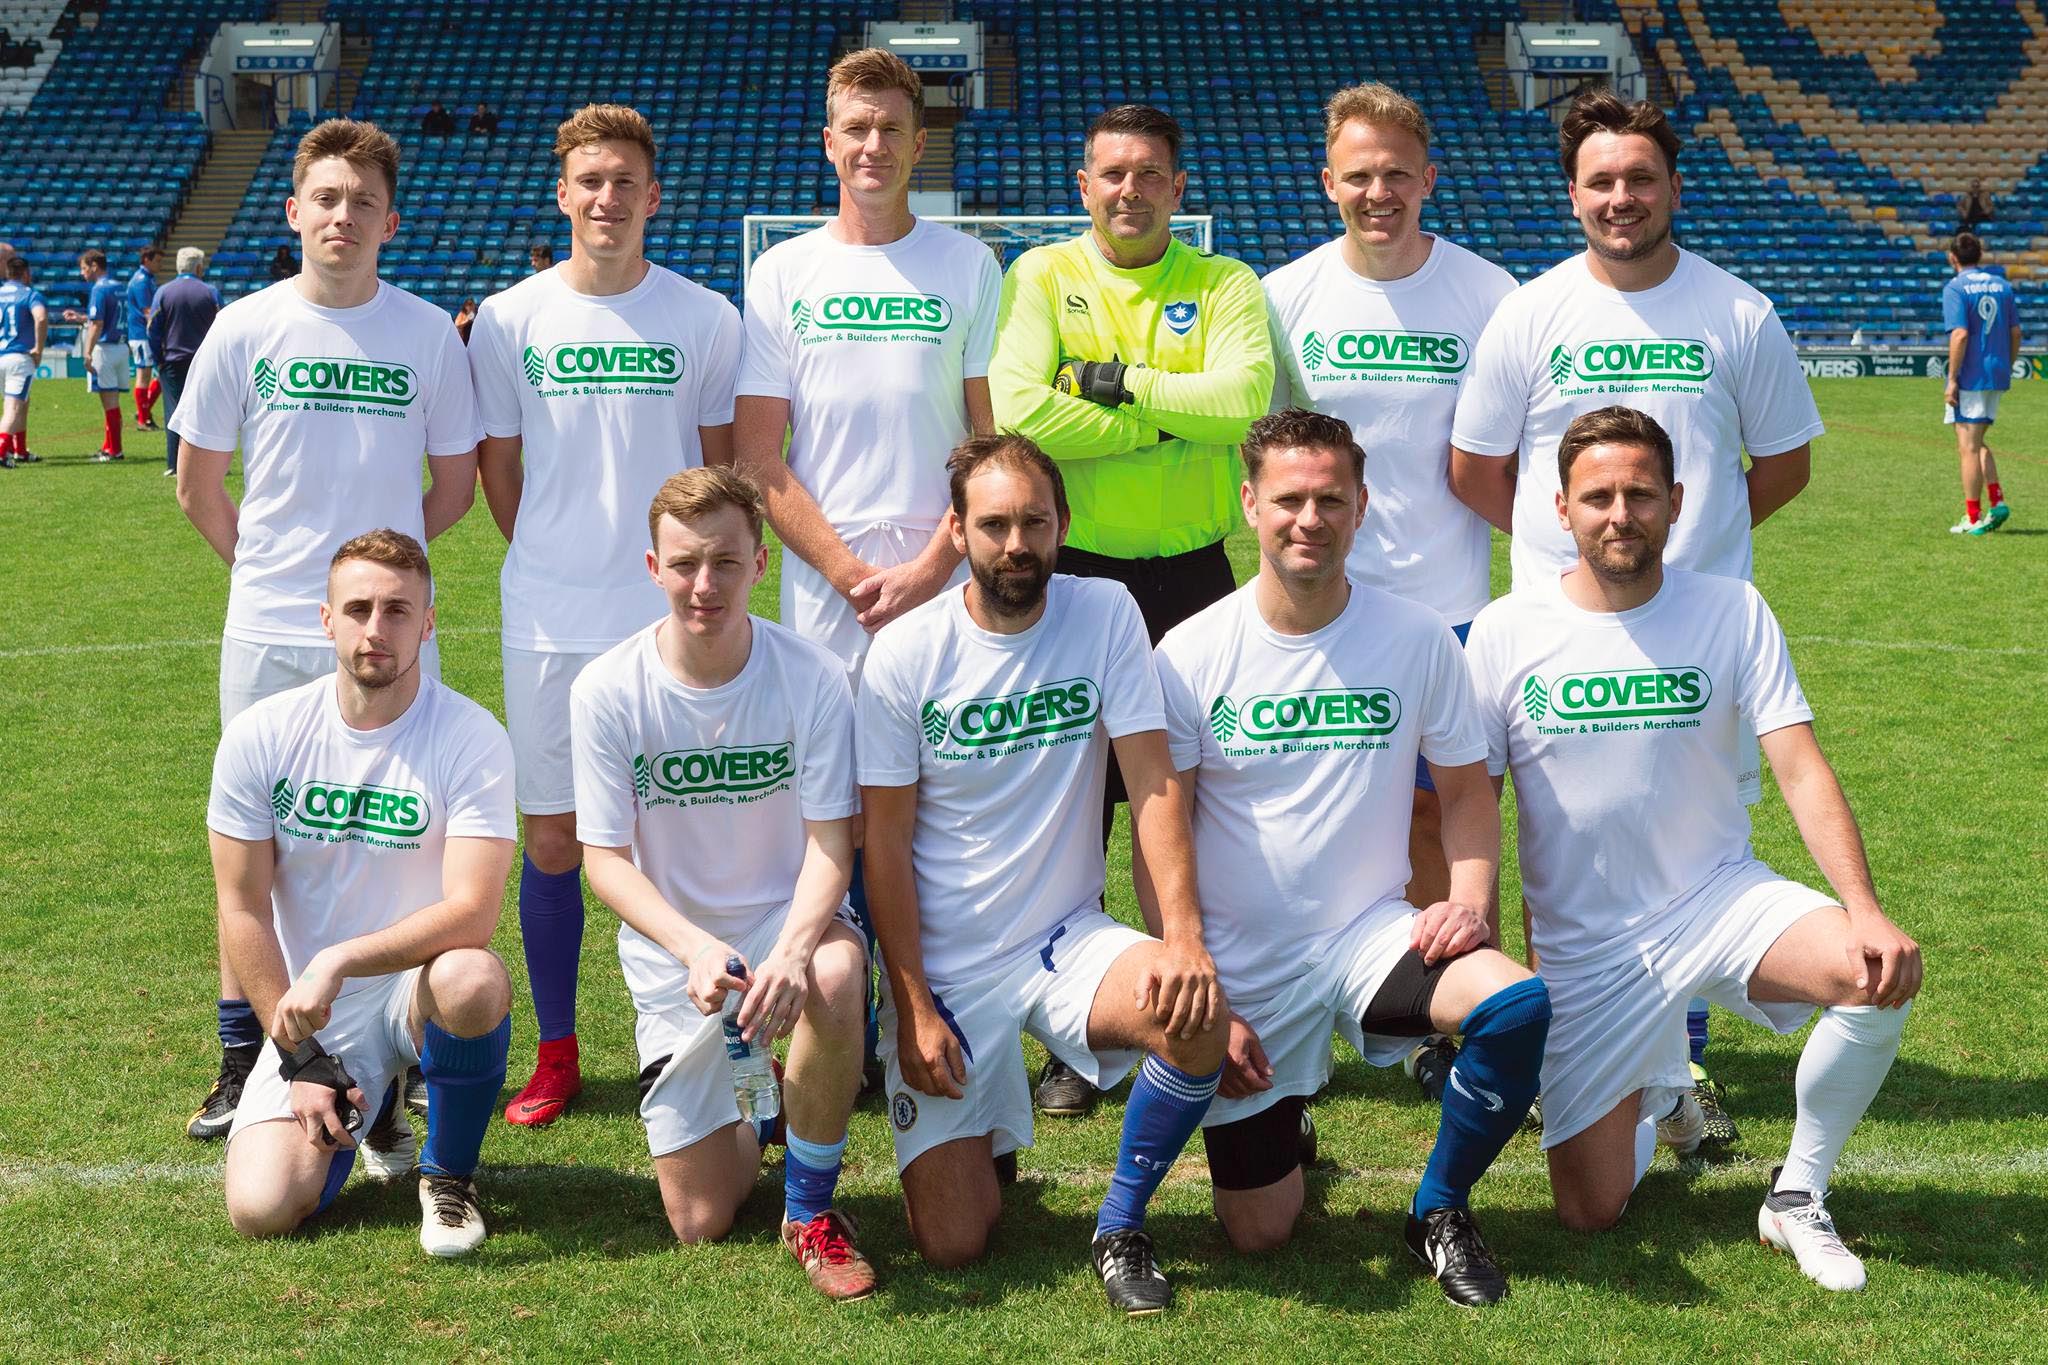 Covers donates £5,000 to Portsmouth FC Academy